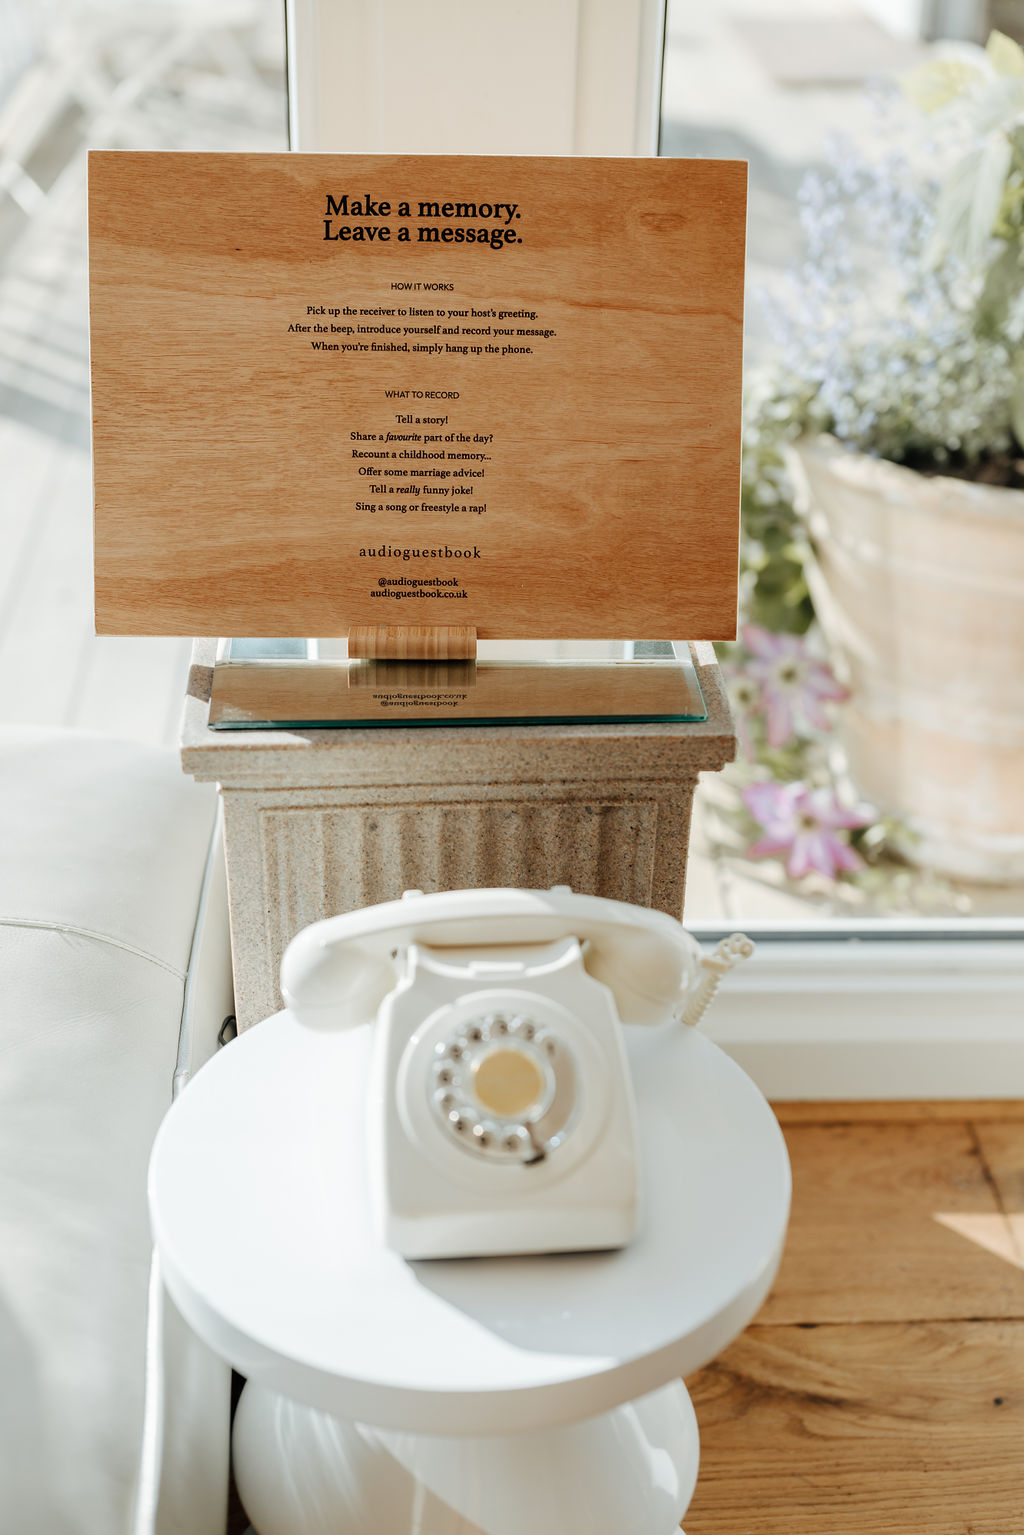 A view of a white telephone on a side table with a wooden sign behind it with instructions on how to leave a message as an alternative wedding guestbook